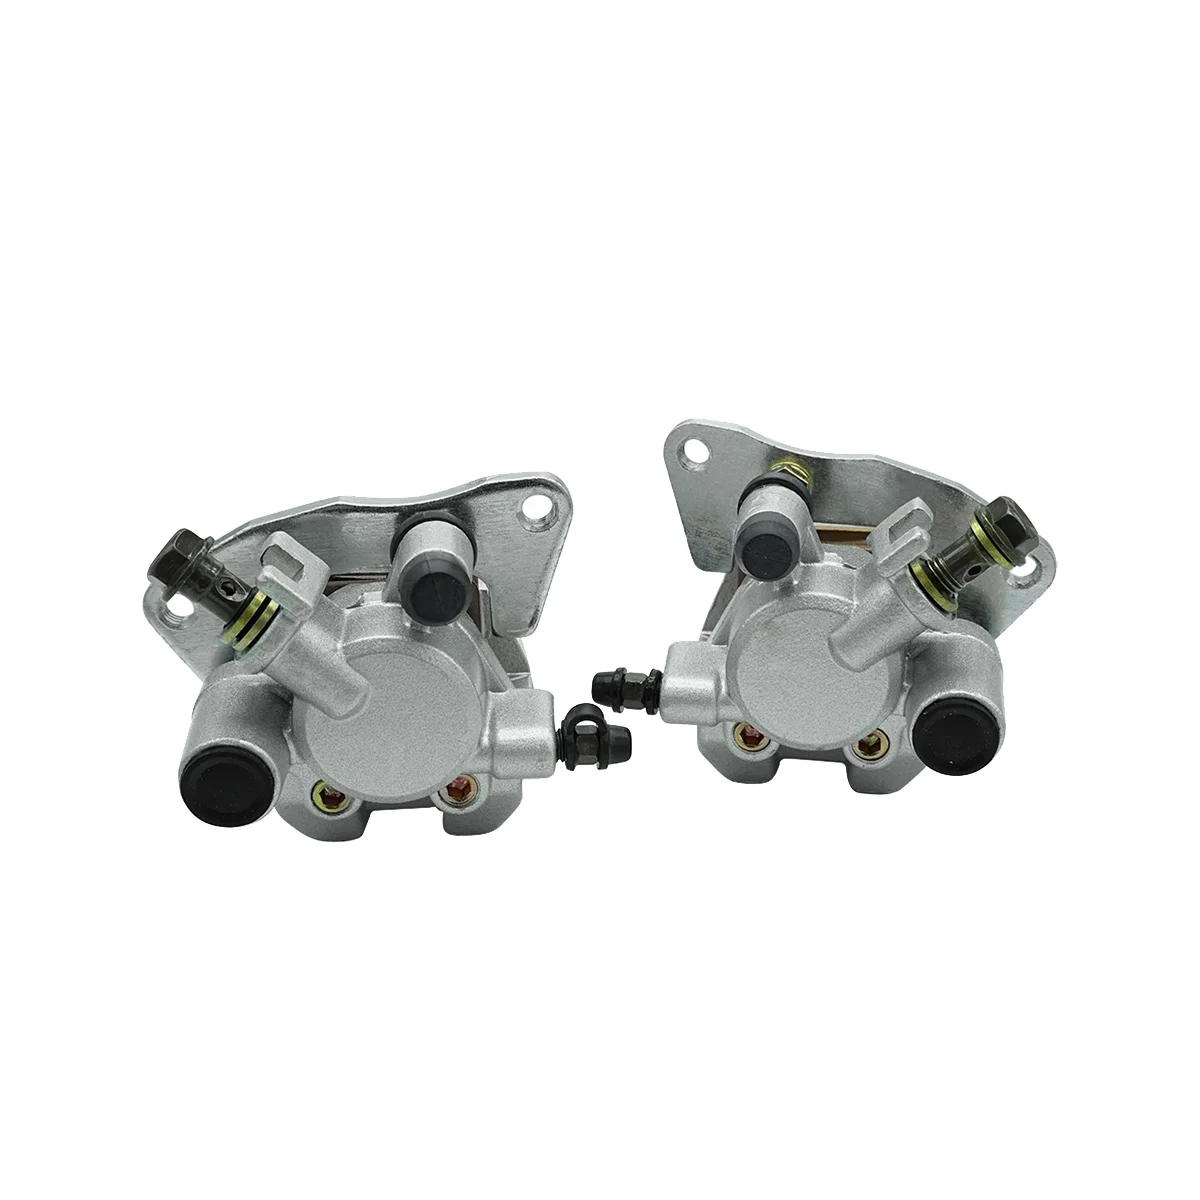 

1Pair Motorcycle Brake Caliper Lower Pump Assy for ATV Grizzly 600 660 1998-2008 4WV-2580T-10-00